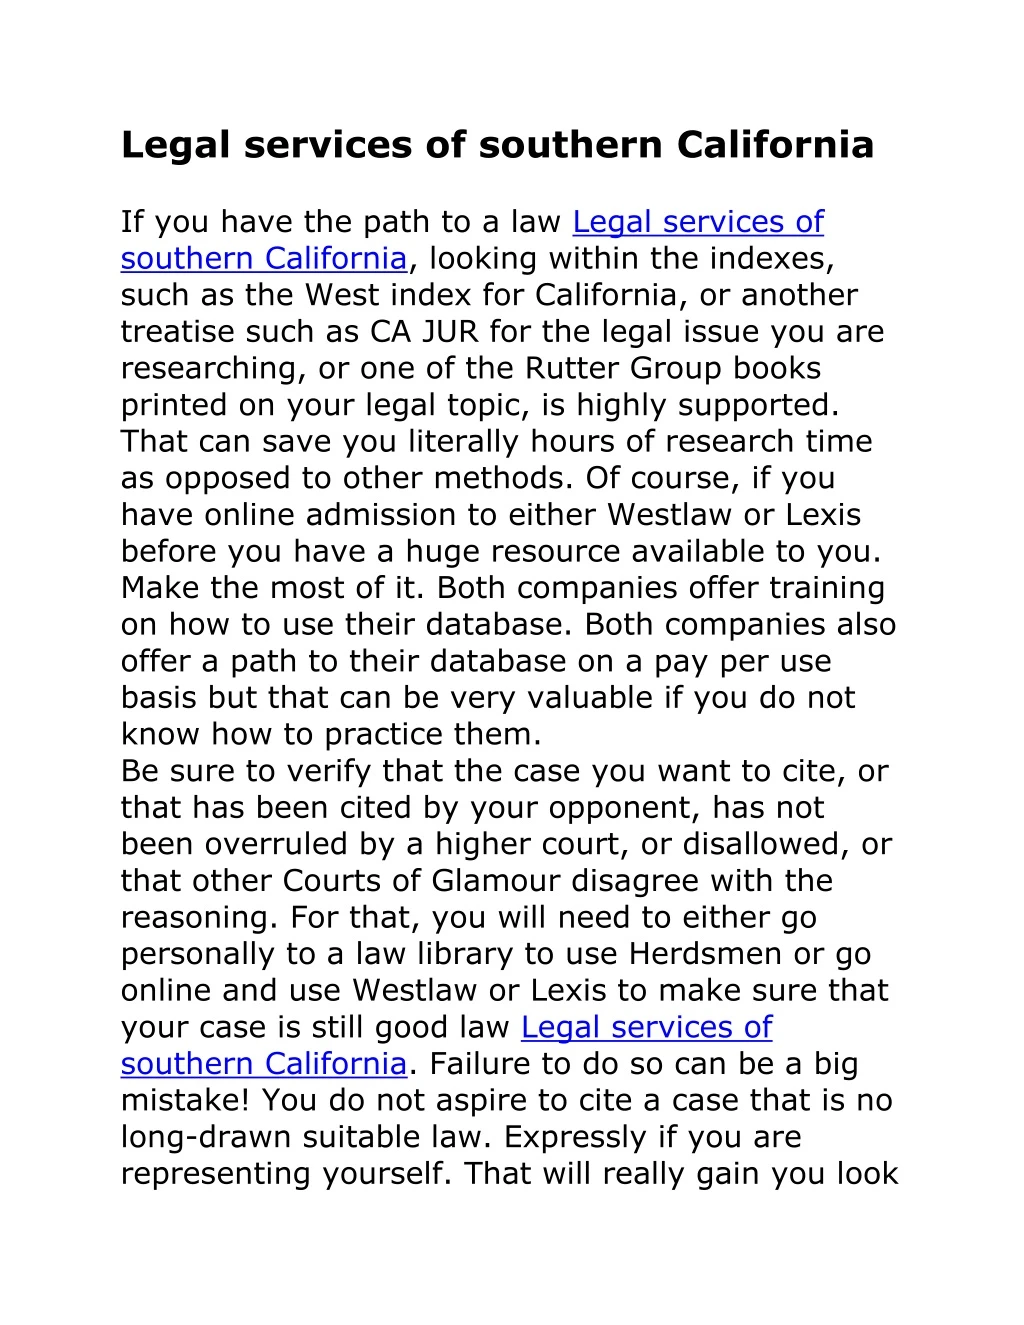 legal services of southern california if you have